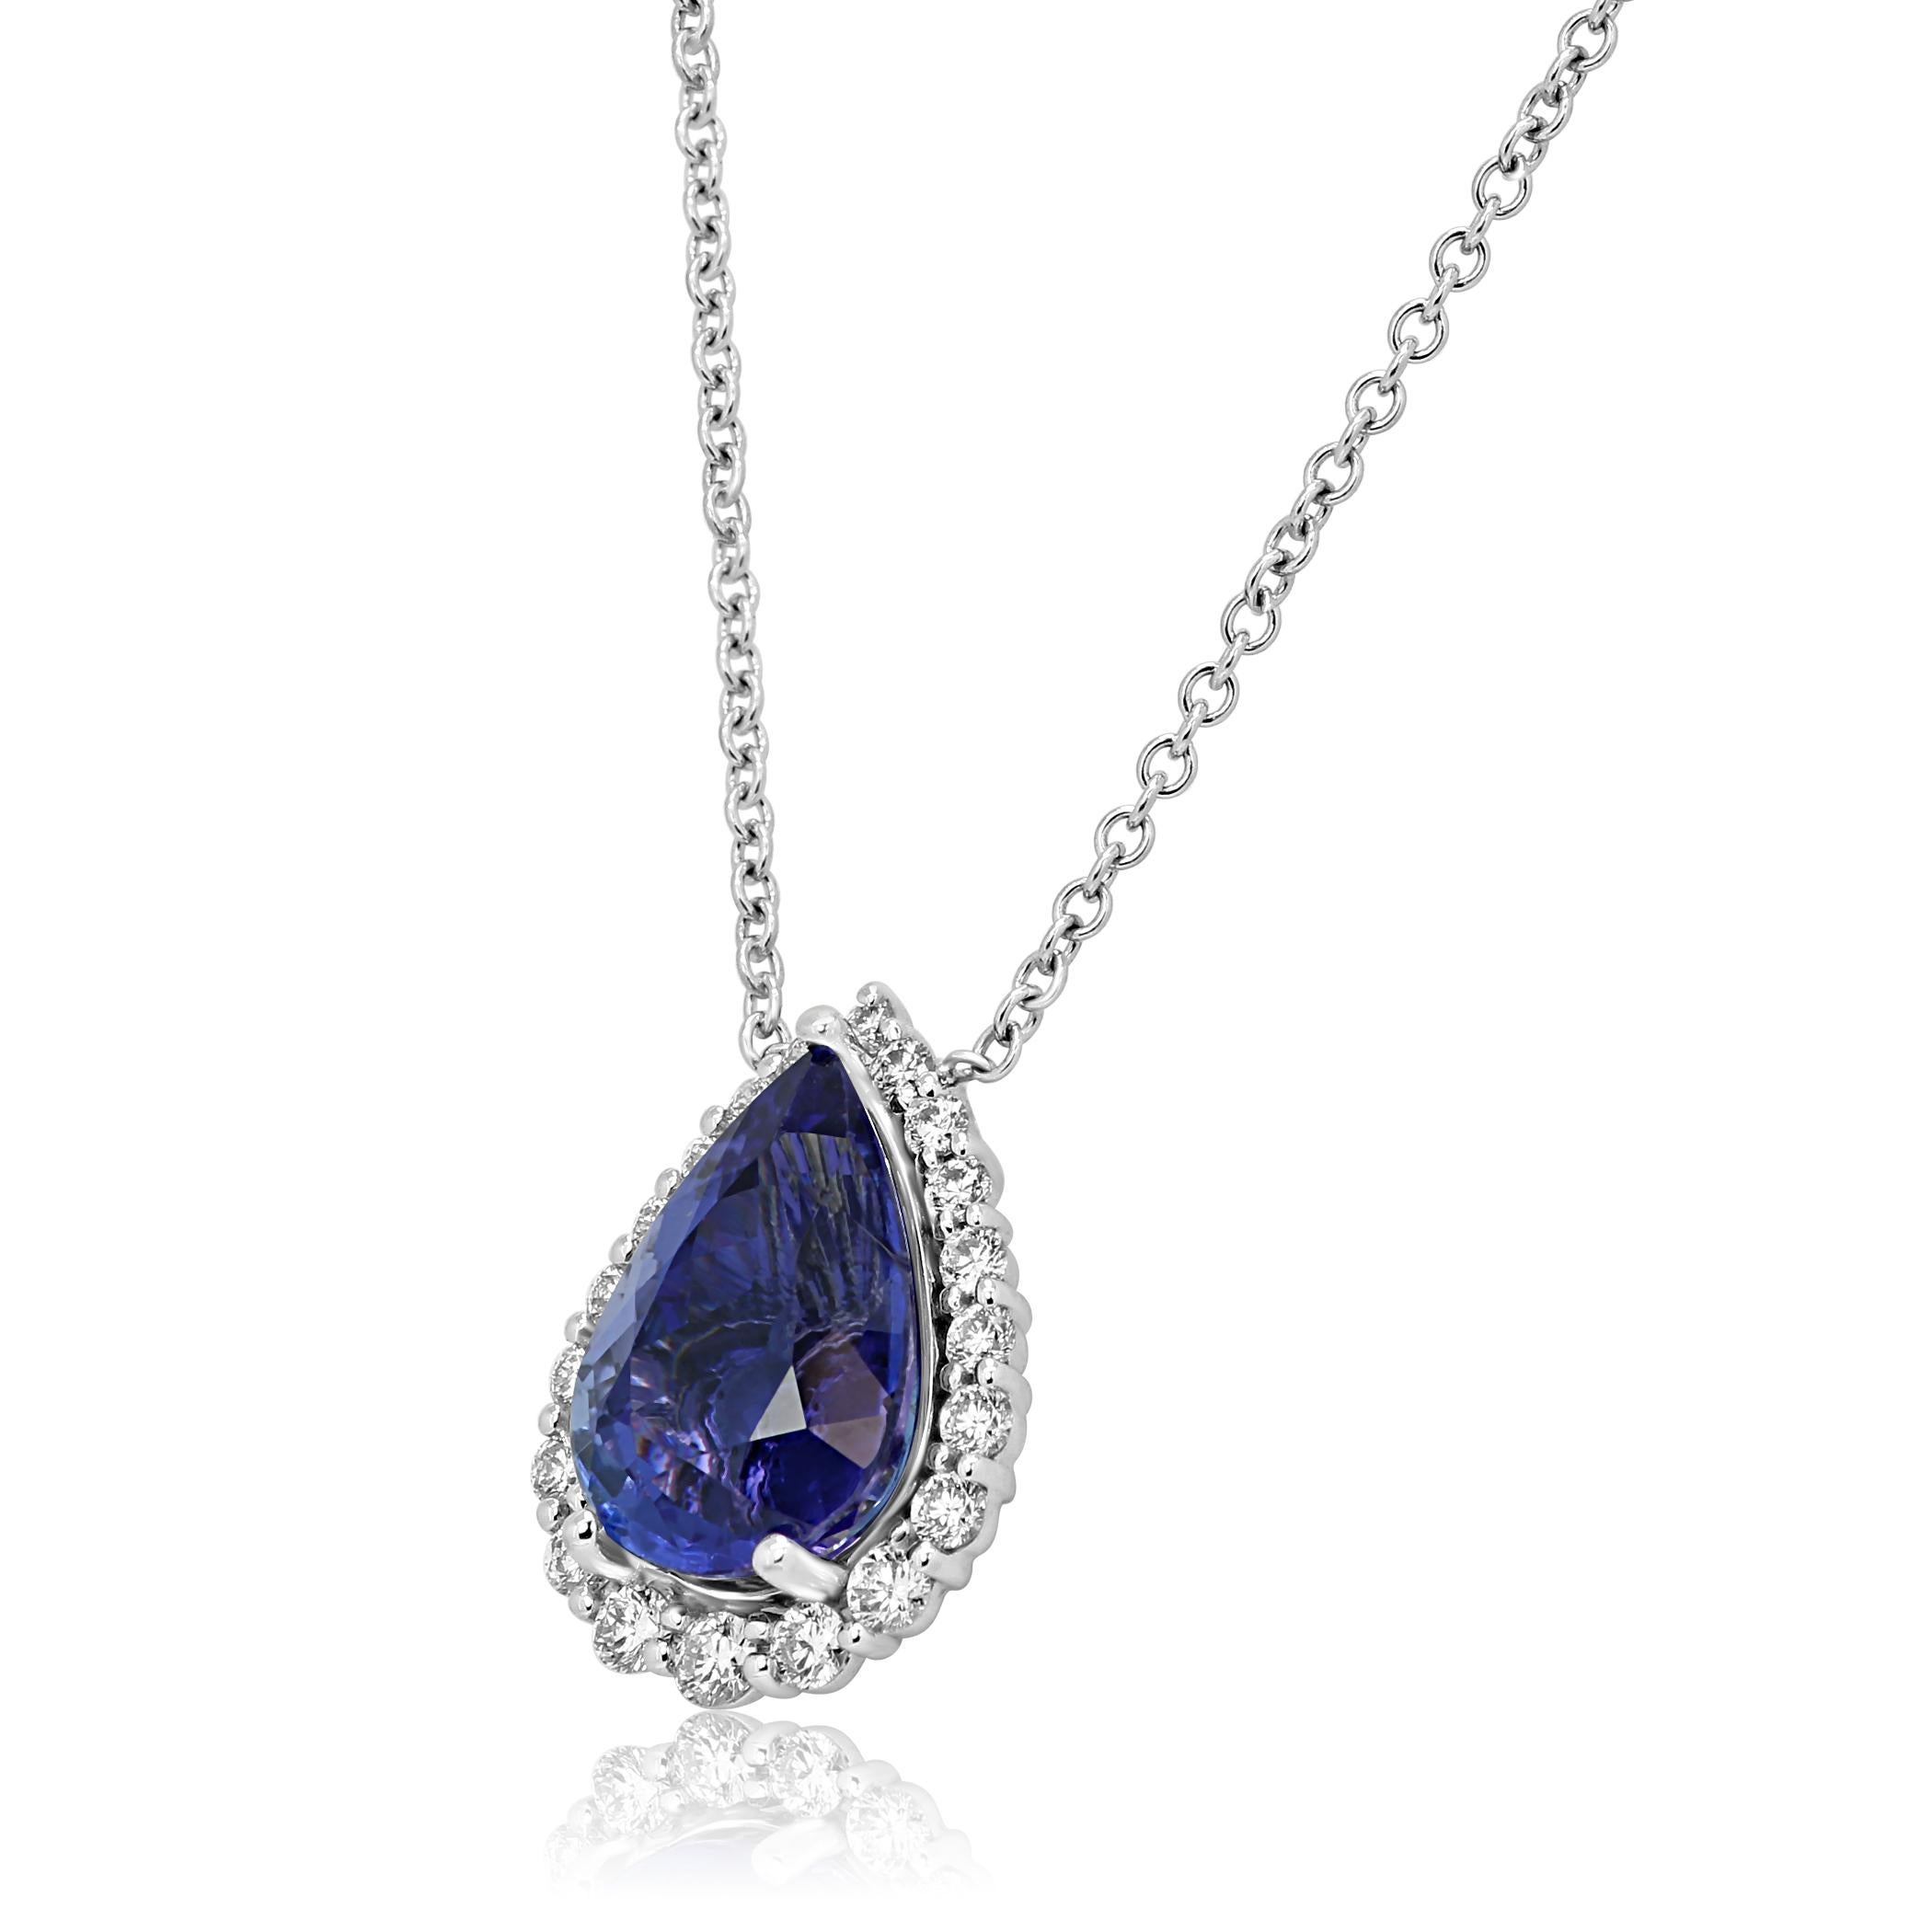 Stunning Tanzanite Pear 6.35 Carat encircled in a single Halo of White Colorless Diamonds VS-SI clarity 0.72 Carat set in 14K White Gold Chic Drop Pendant Chain Necklace with beautiful wire work gallery in back.

Style available in different price